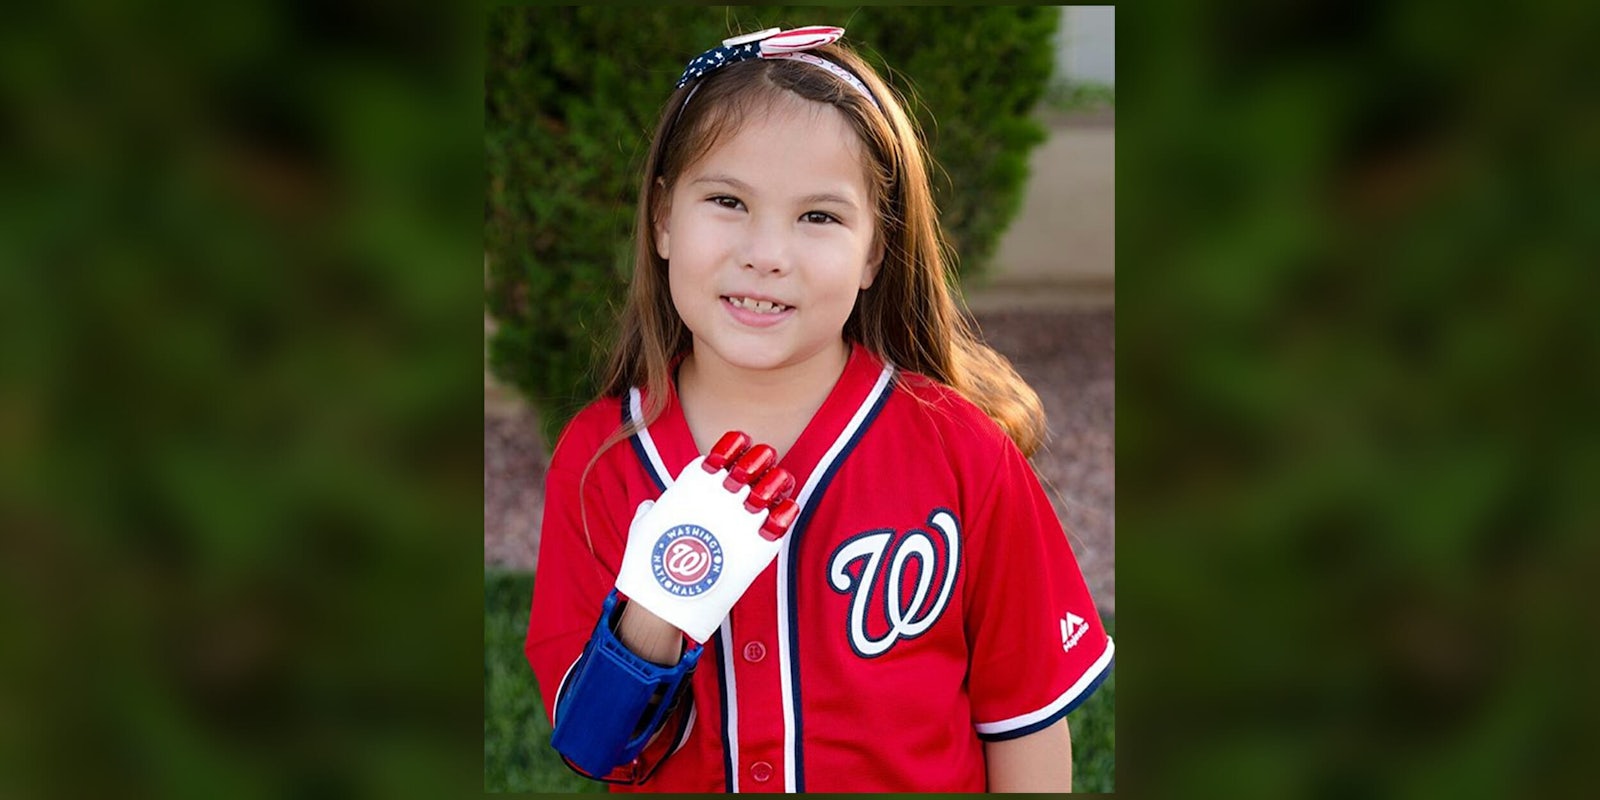 Hailey poses in Washington Nationals jersey